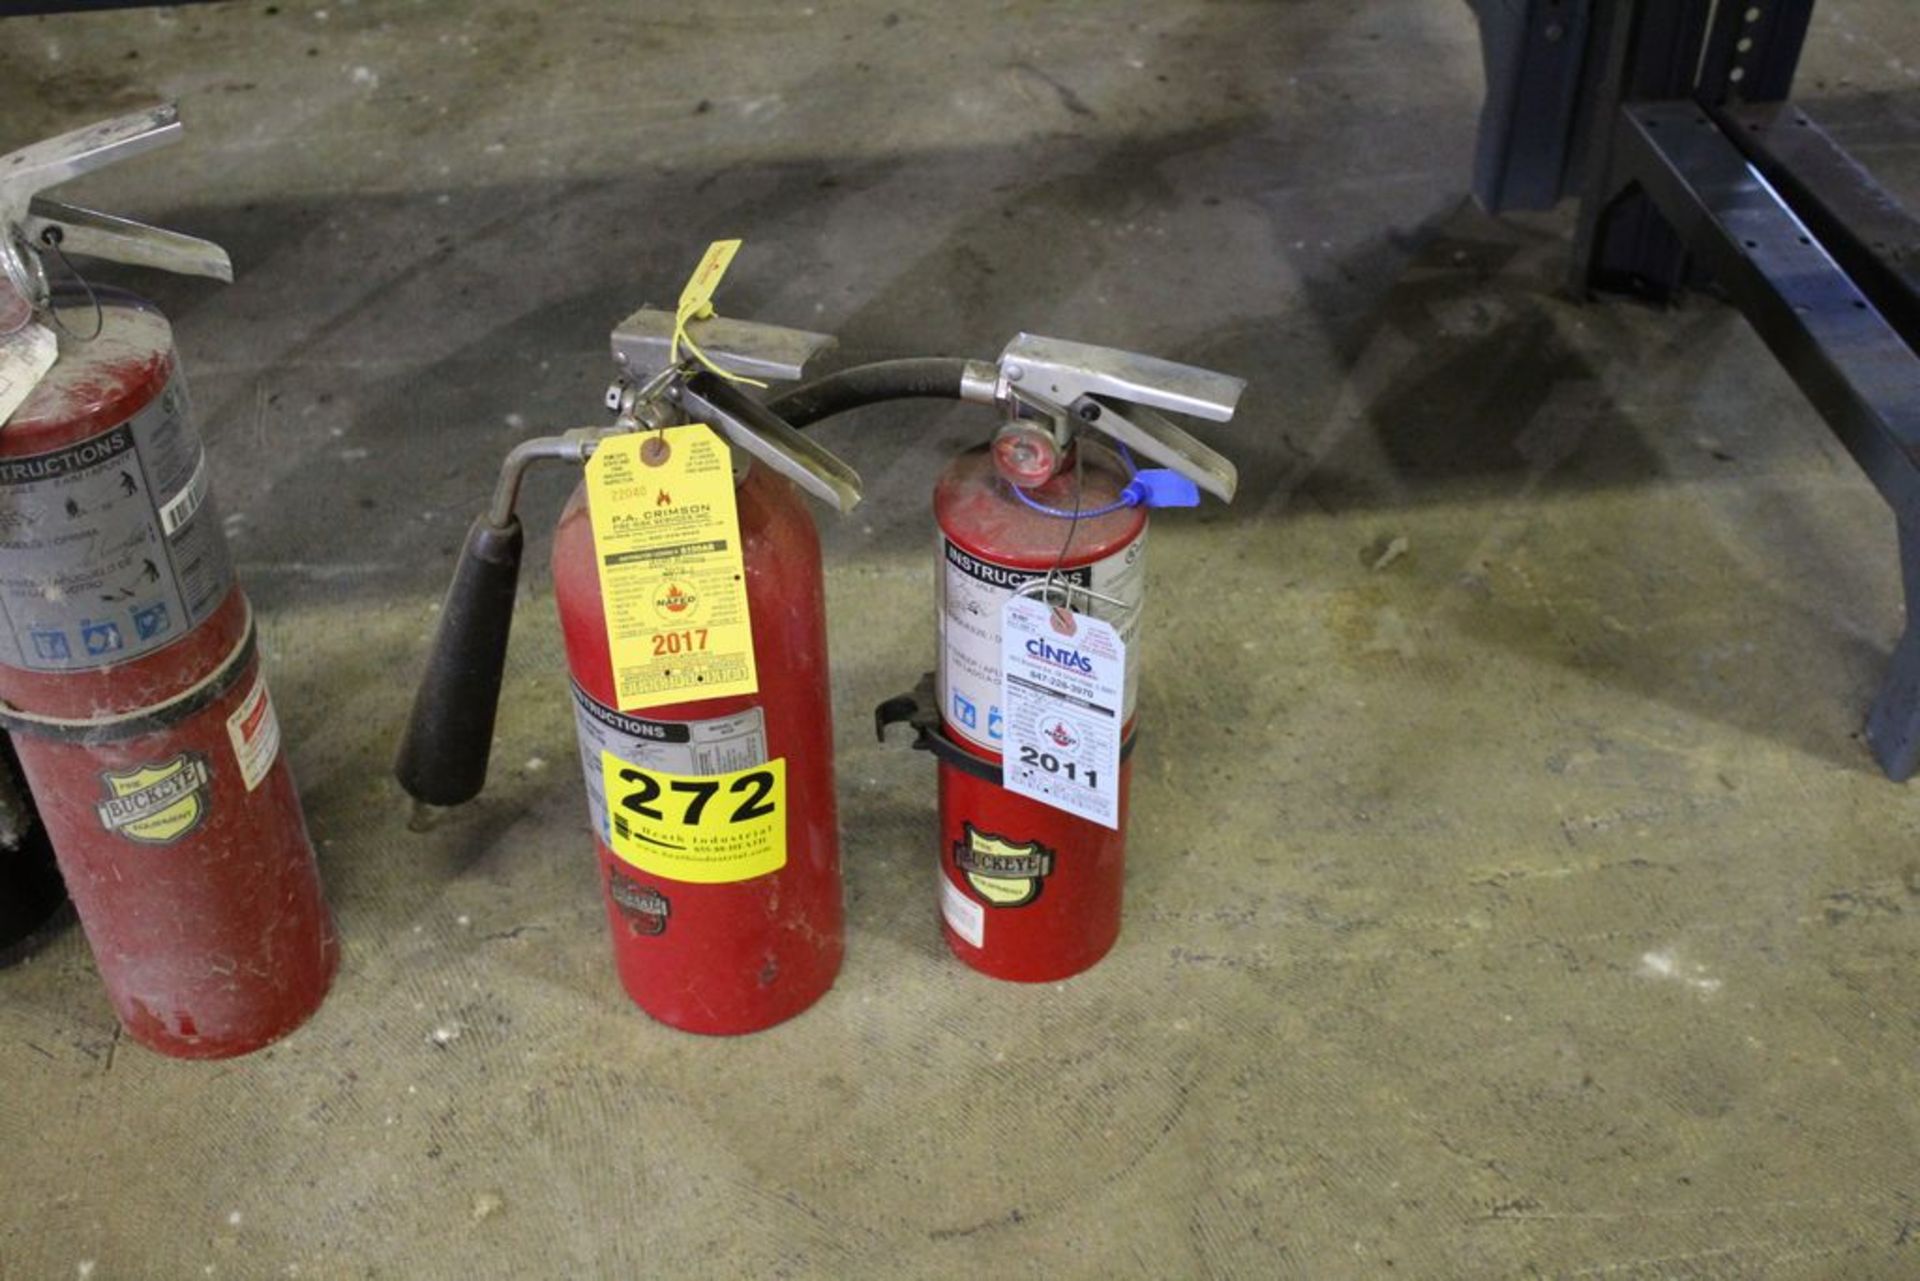 (2) FIRE EXTINGUISHERS, ONE WITH A 2017 TAGS